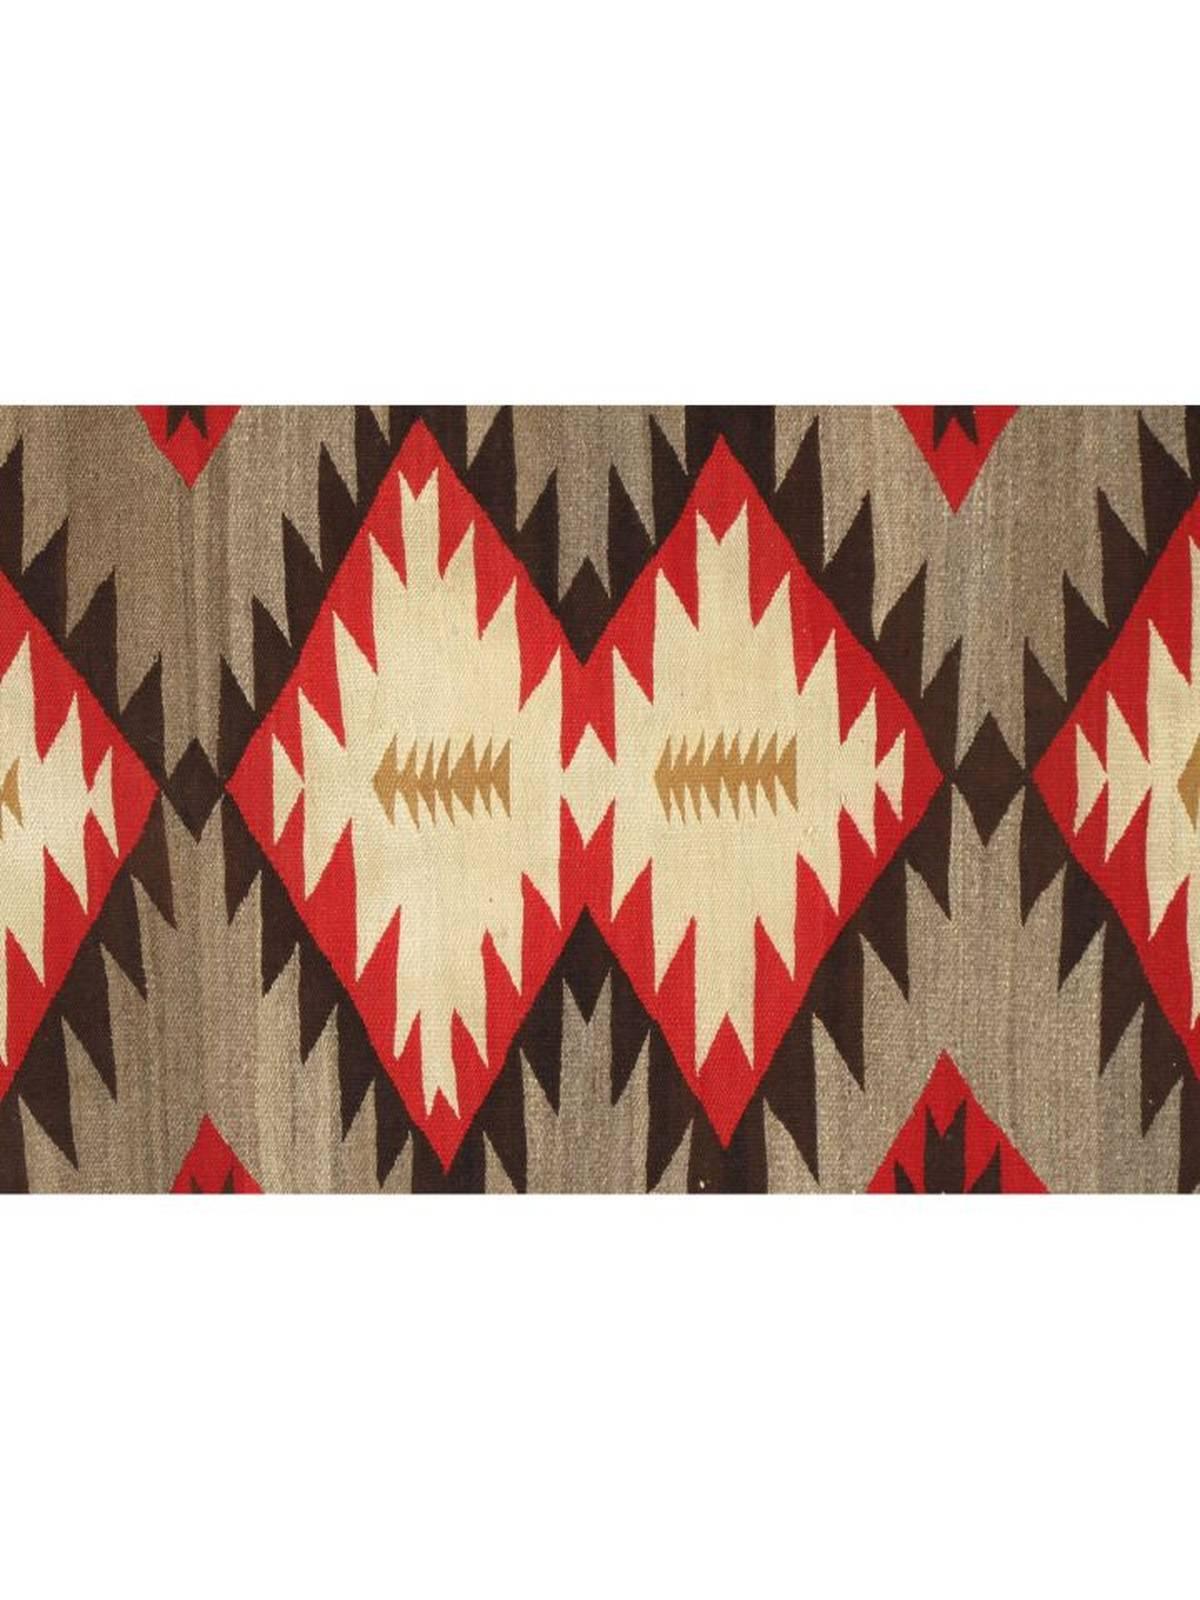 Vintage wool Navajo rug in ivory, grey, red, brown and tan. Very good overall condition.